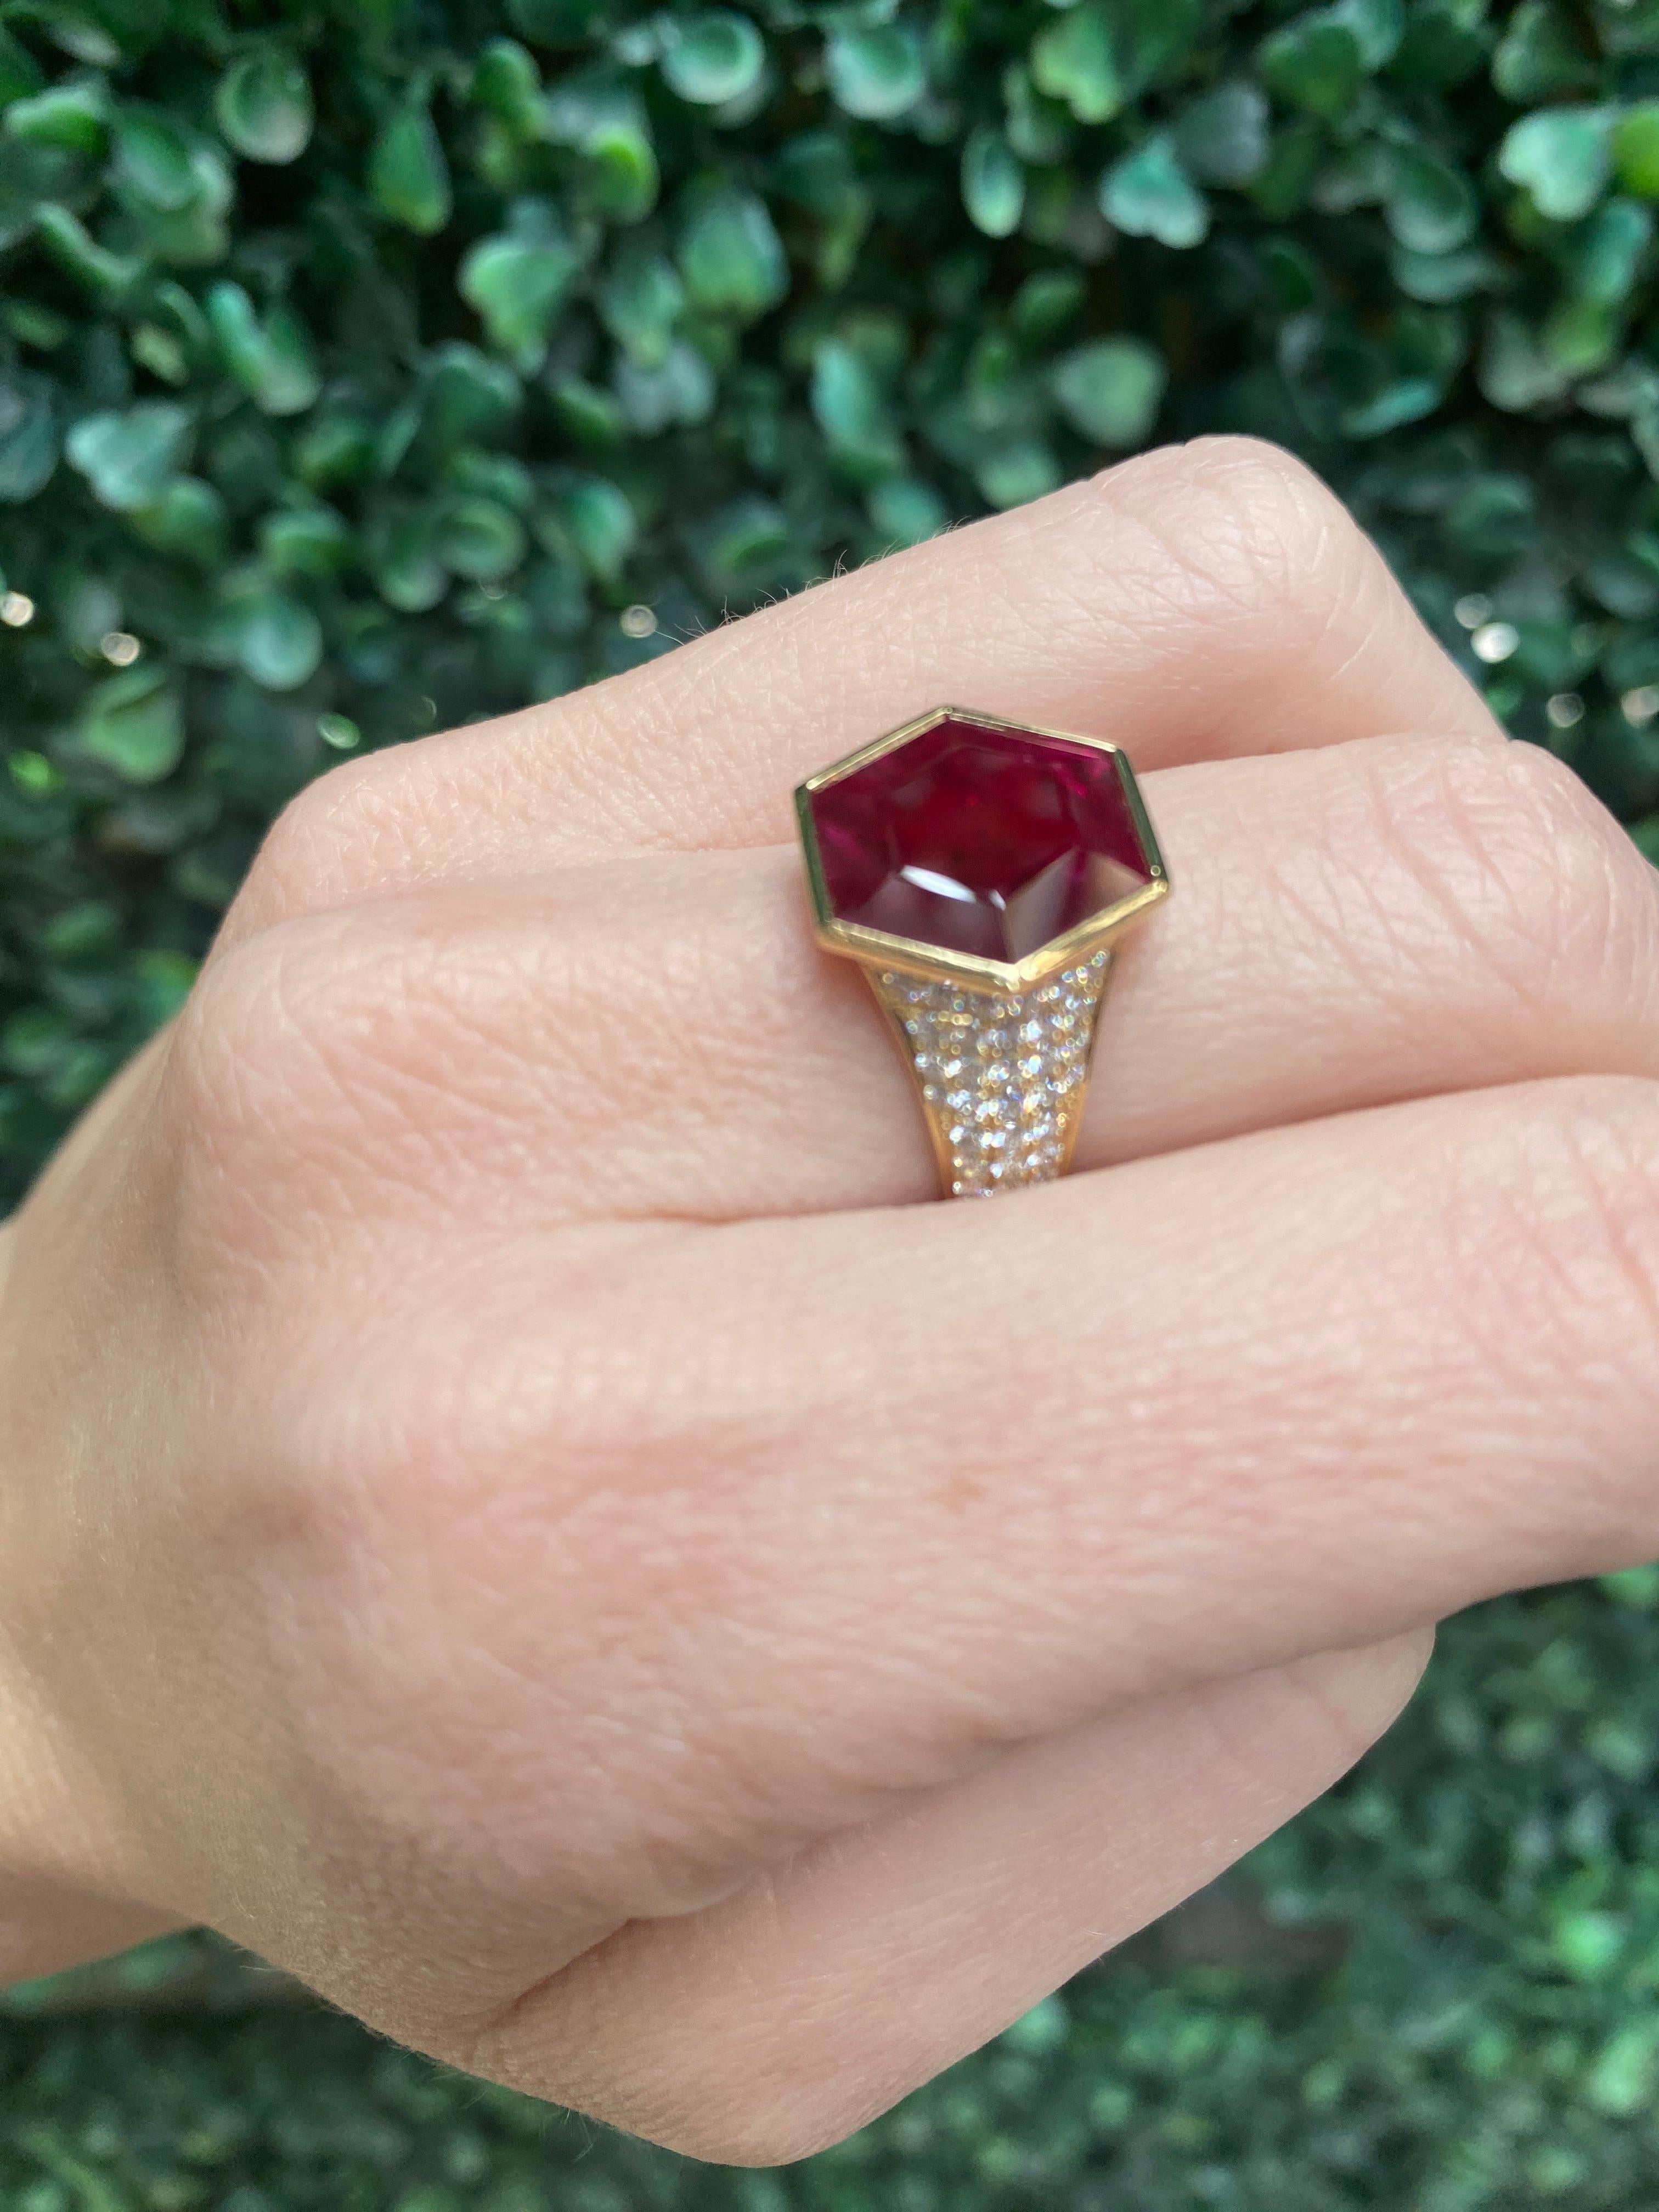 GIA Certified 5.51ct Hexagonal Cut Mozambique Ruby 18k Cocktail Ring For Sale 14